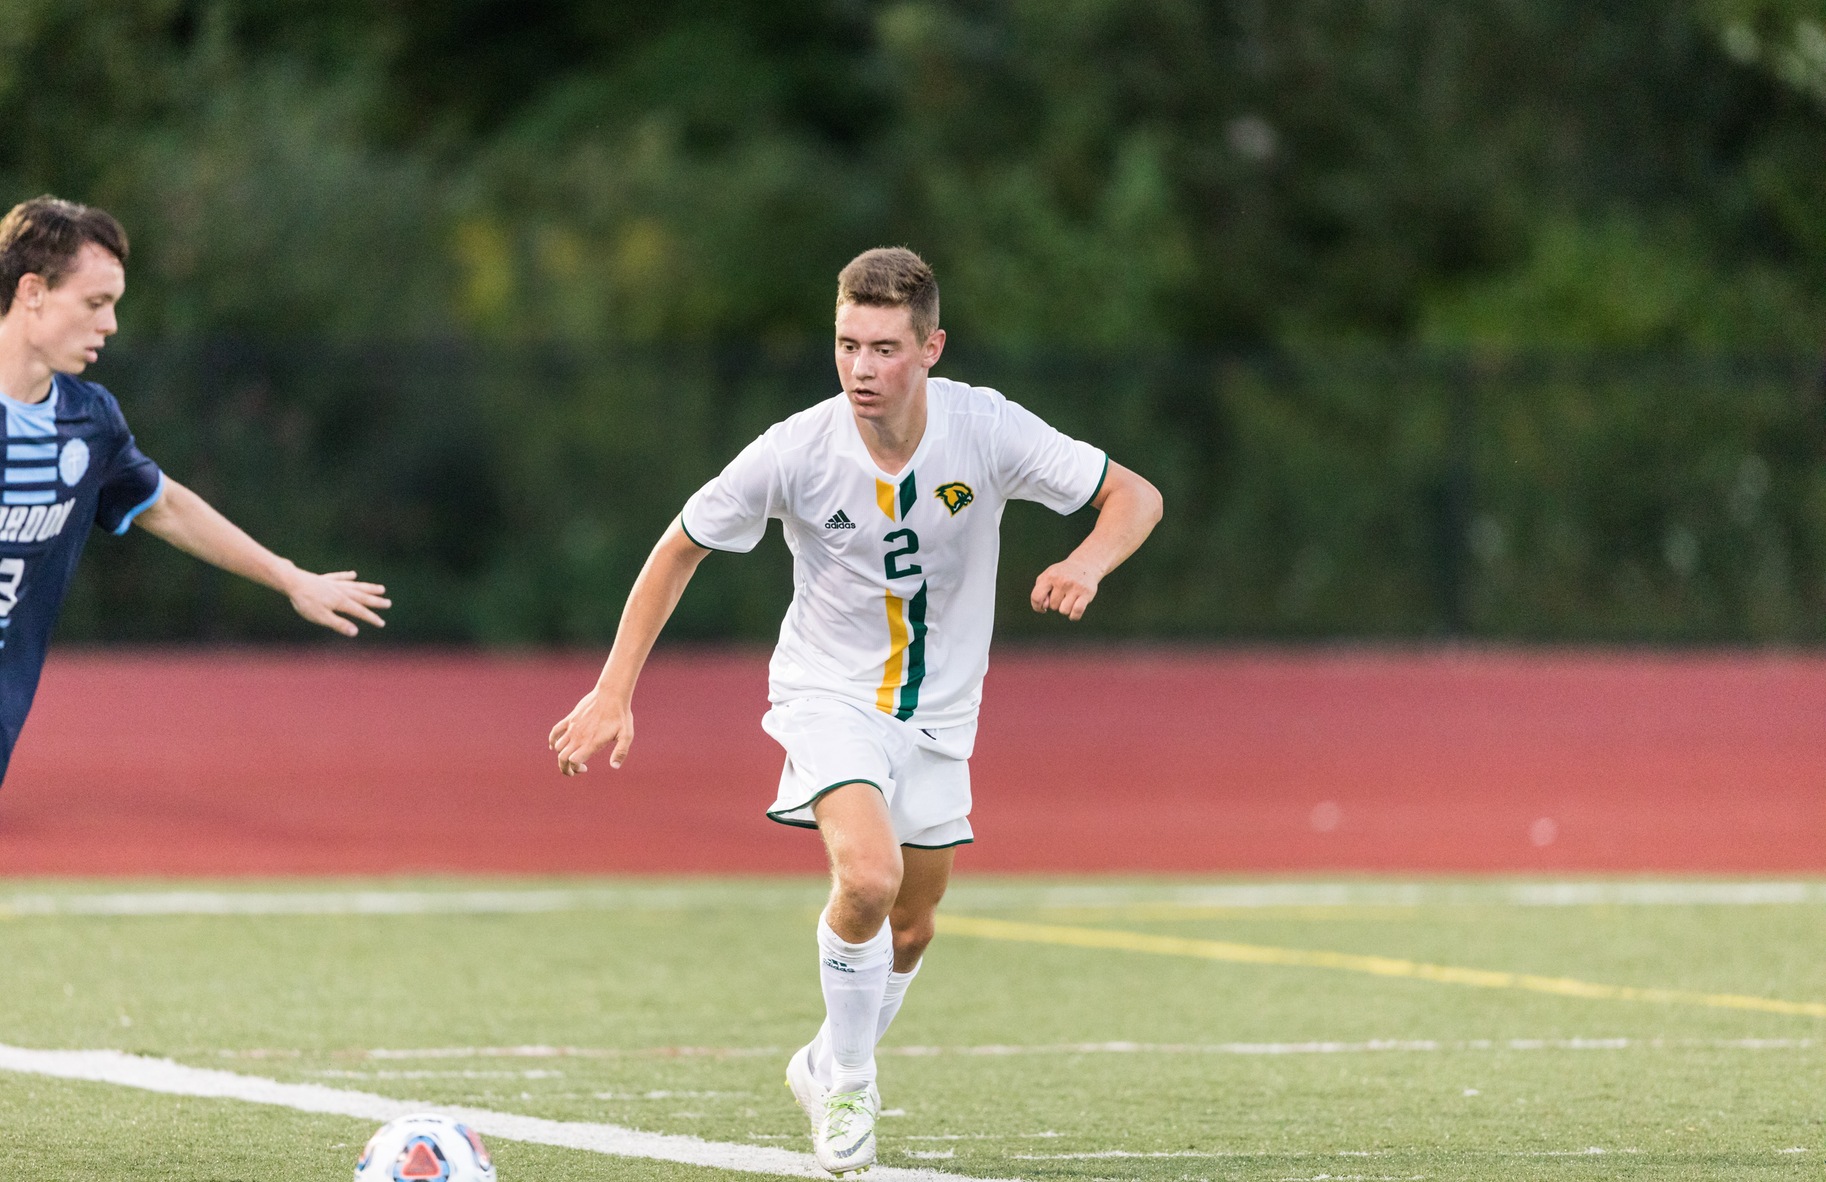 Falcons Edged By Vikings, 2-0 In MASCAC Action